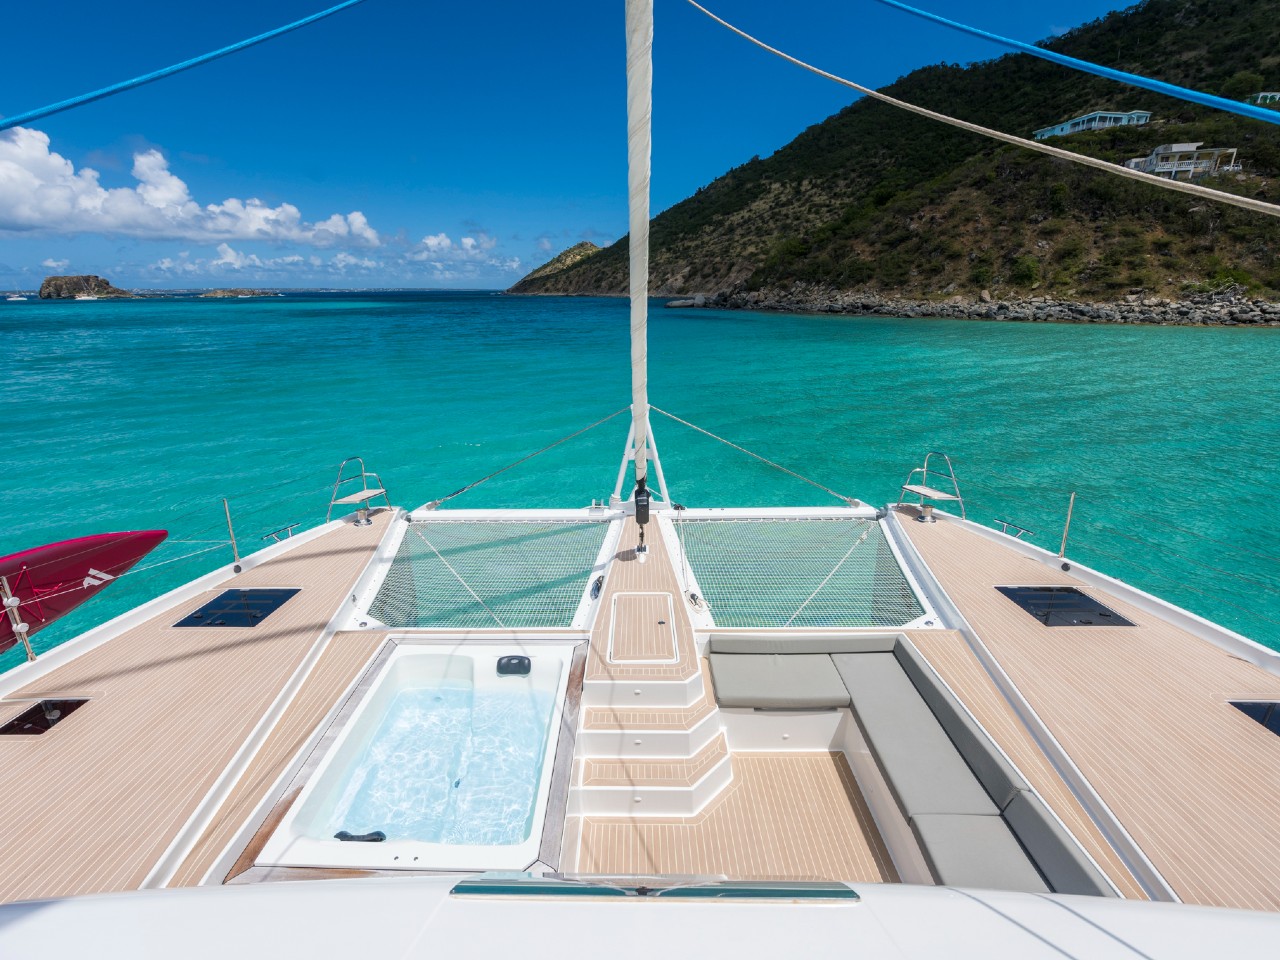 Foredeck Jacuzzi